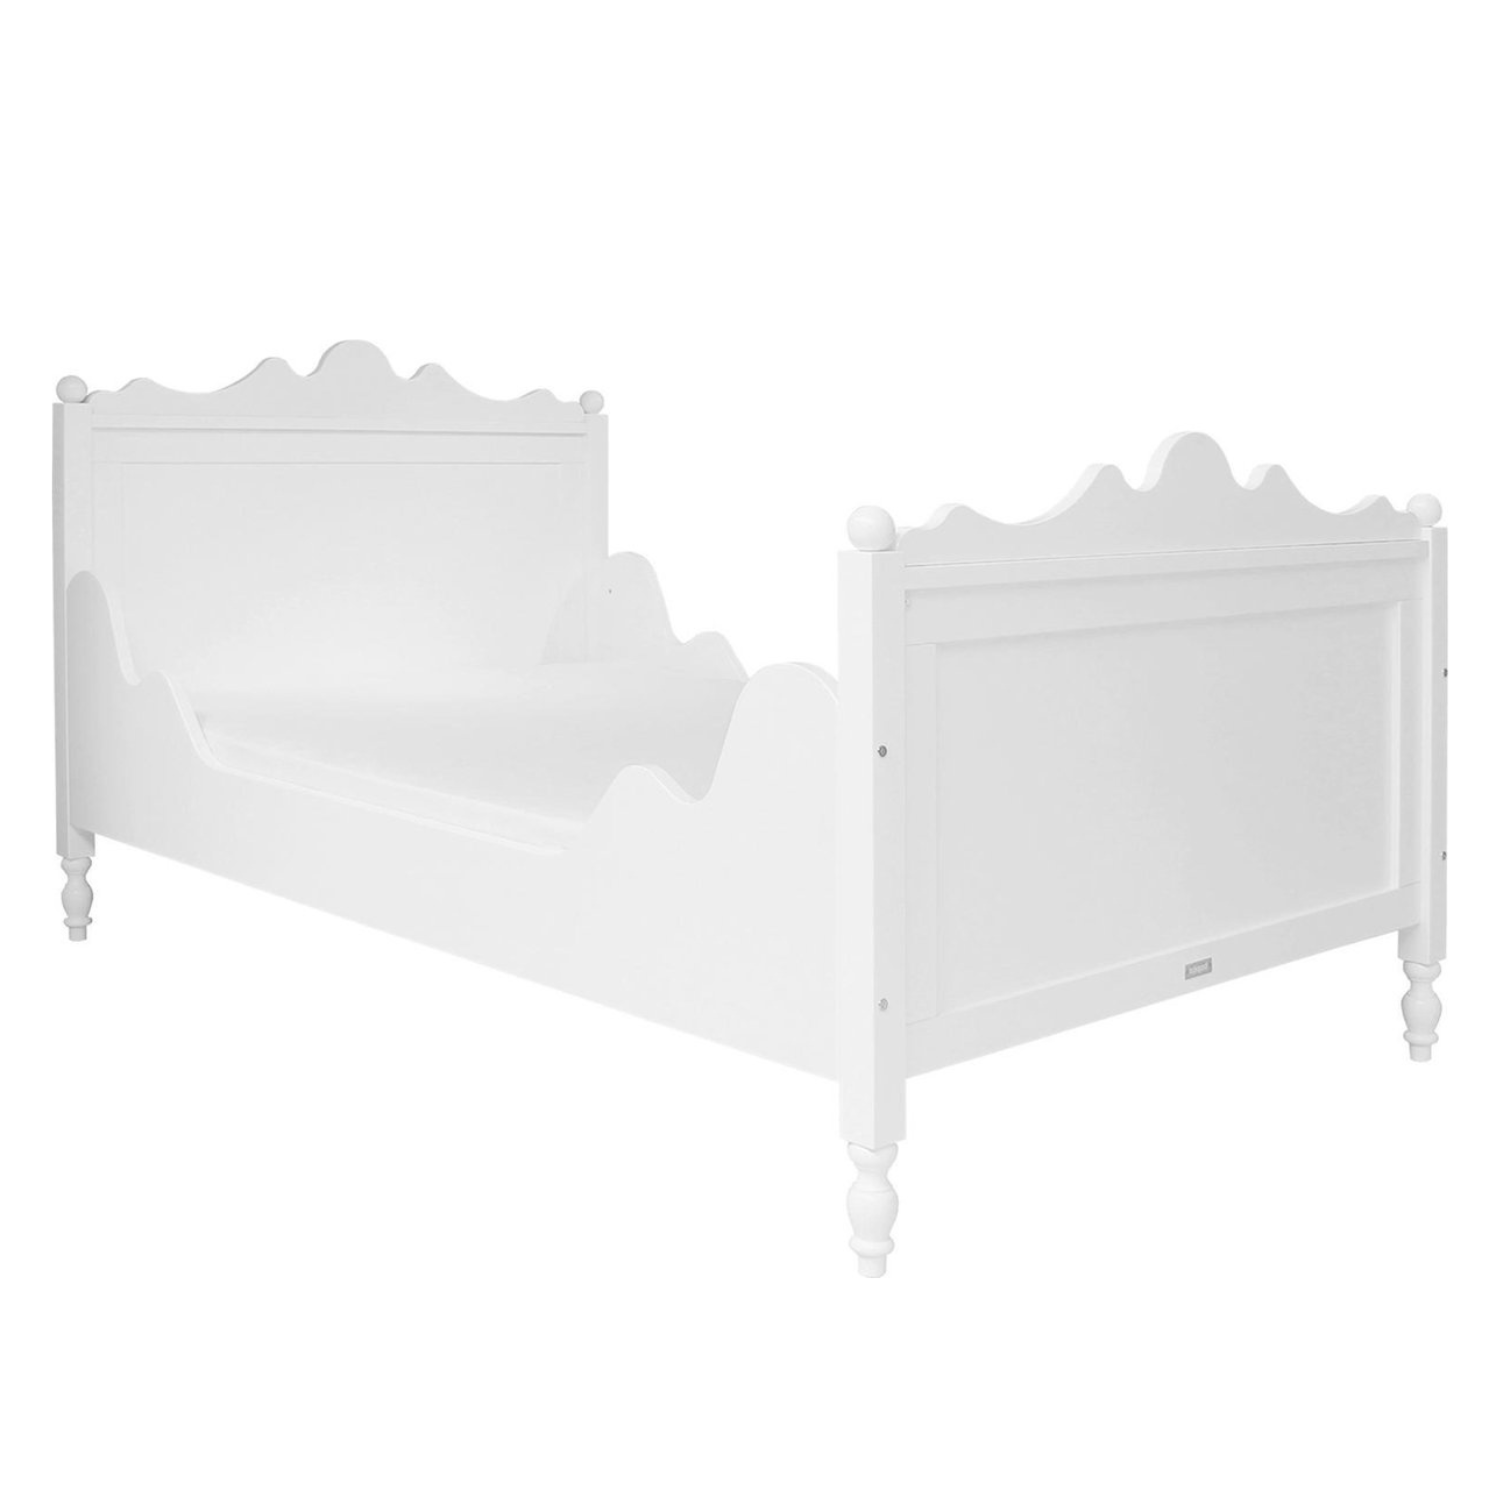 Kids Furniture Store Singapore, Kids beds Singapore, Children bed frames, princess bed, beds for girls, twin/double bed singapore